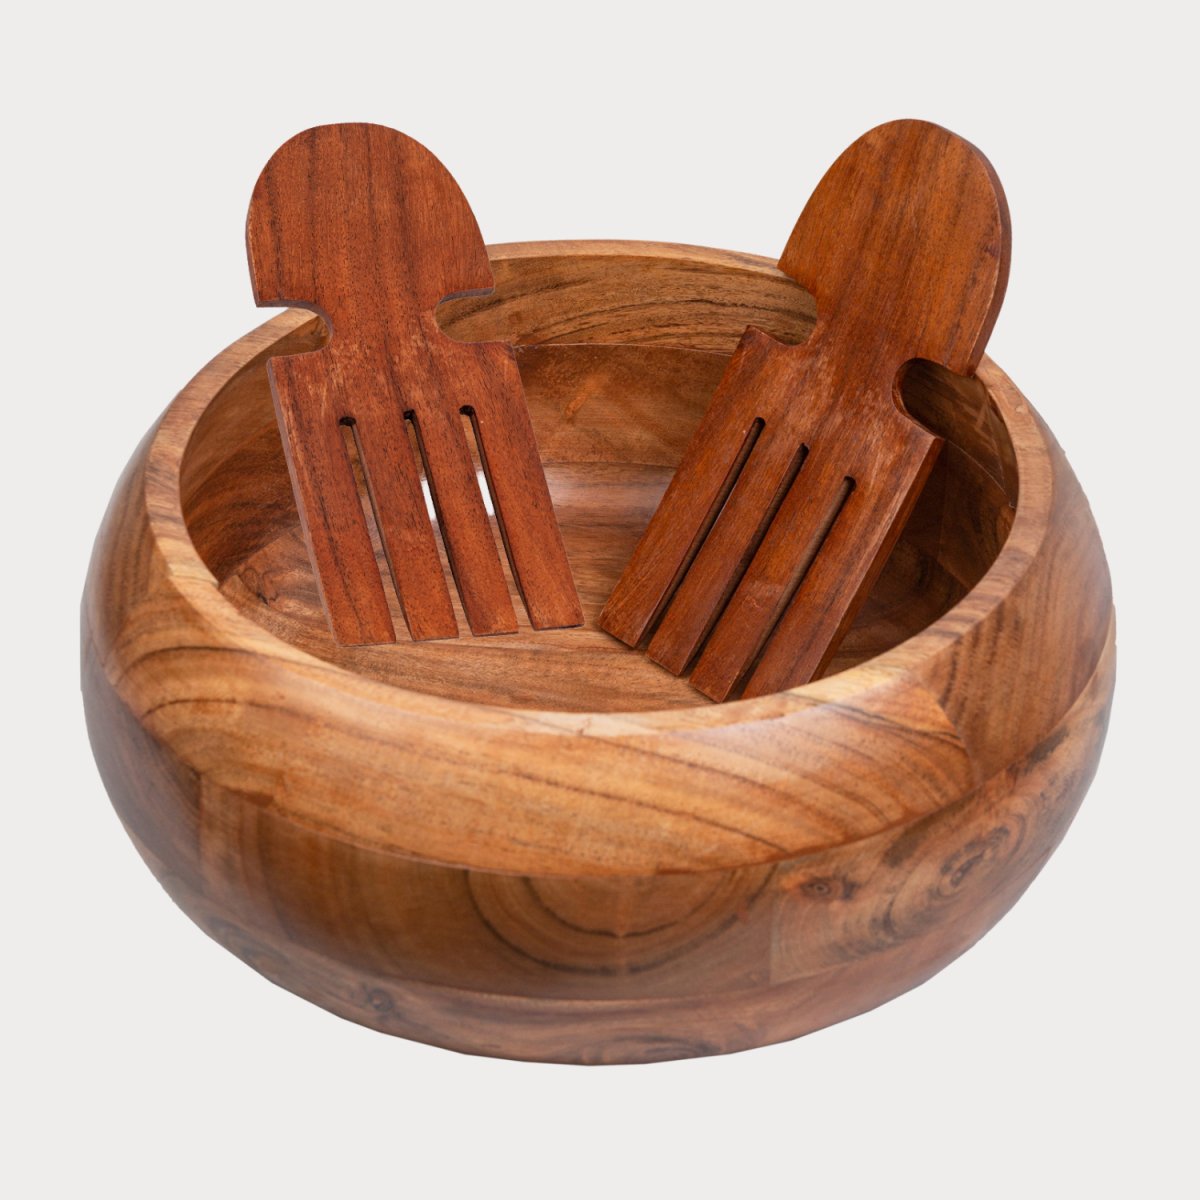 Salad Bowl (Large) With Set of 2 Servers - Aesthetic Living